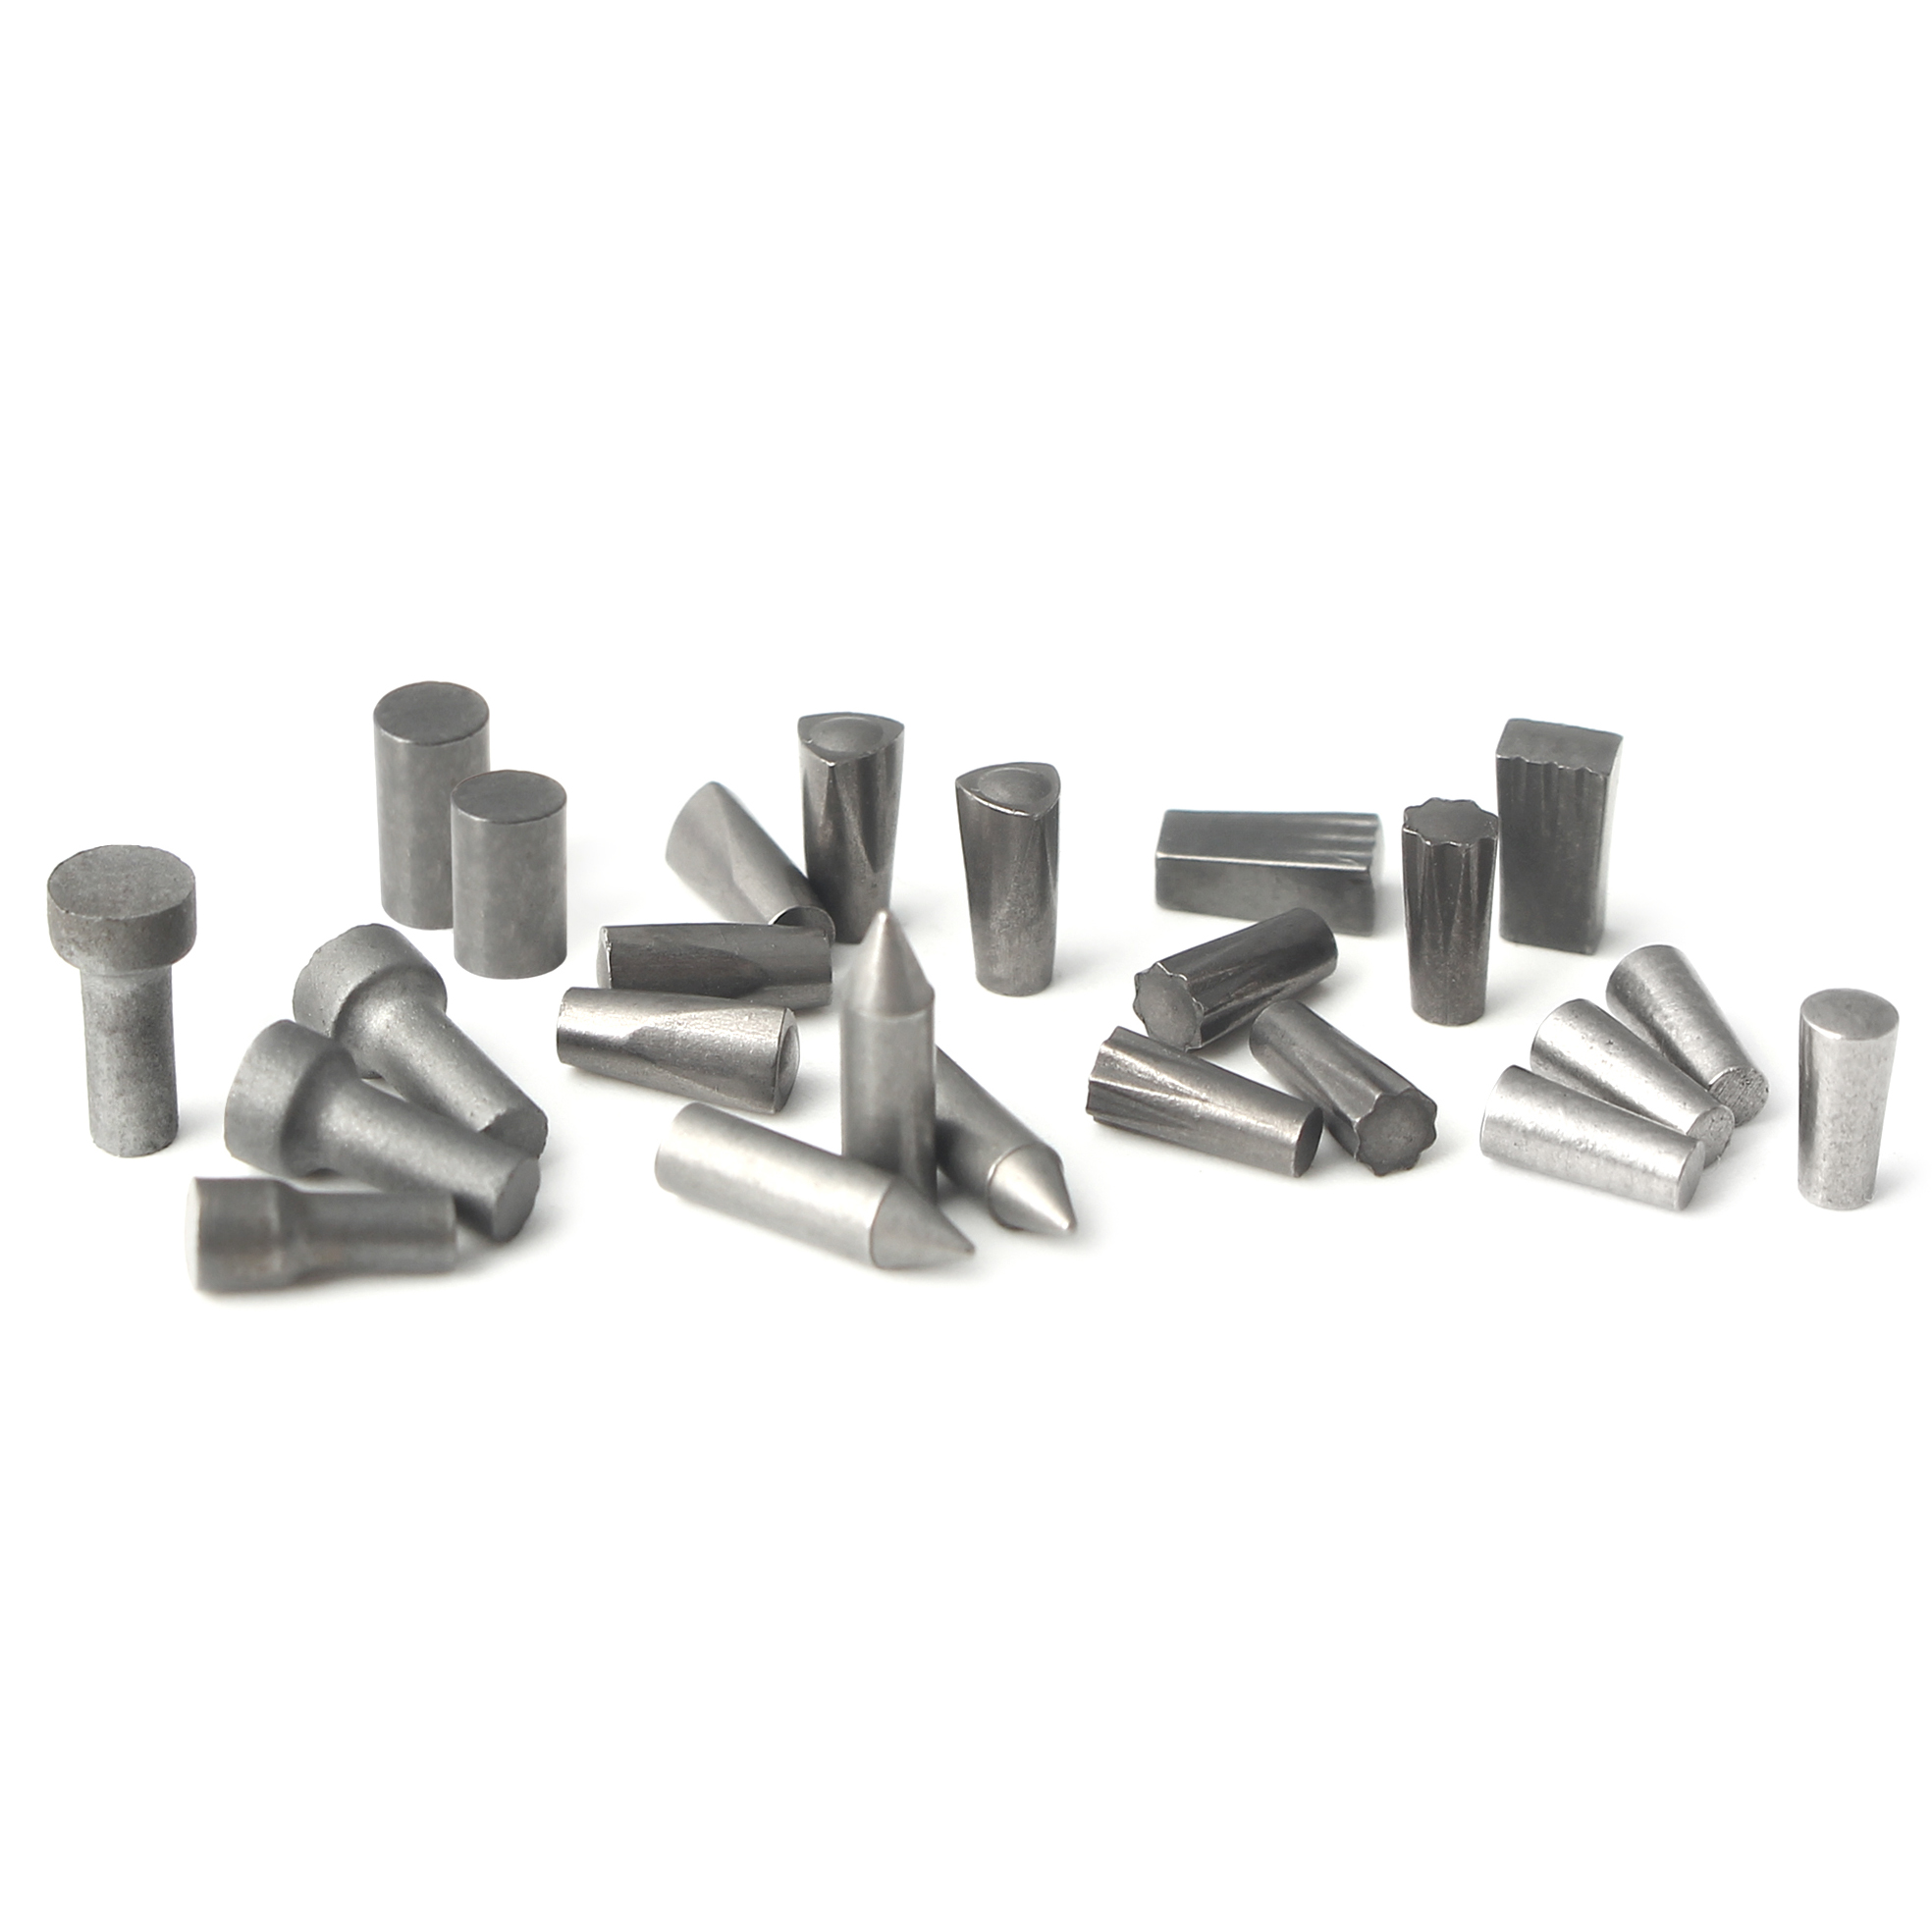 Wear resistant tungsten carbide pins for tire studs or horse